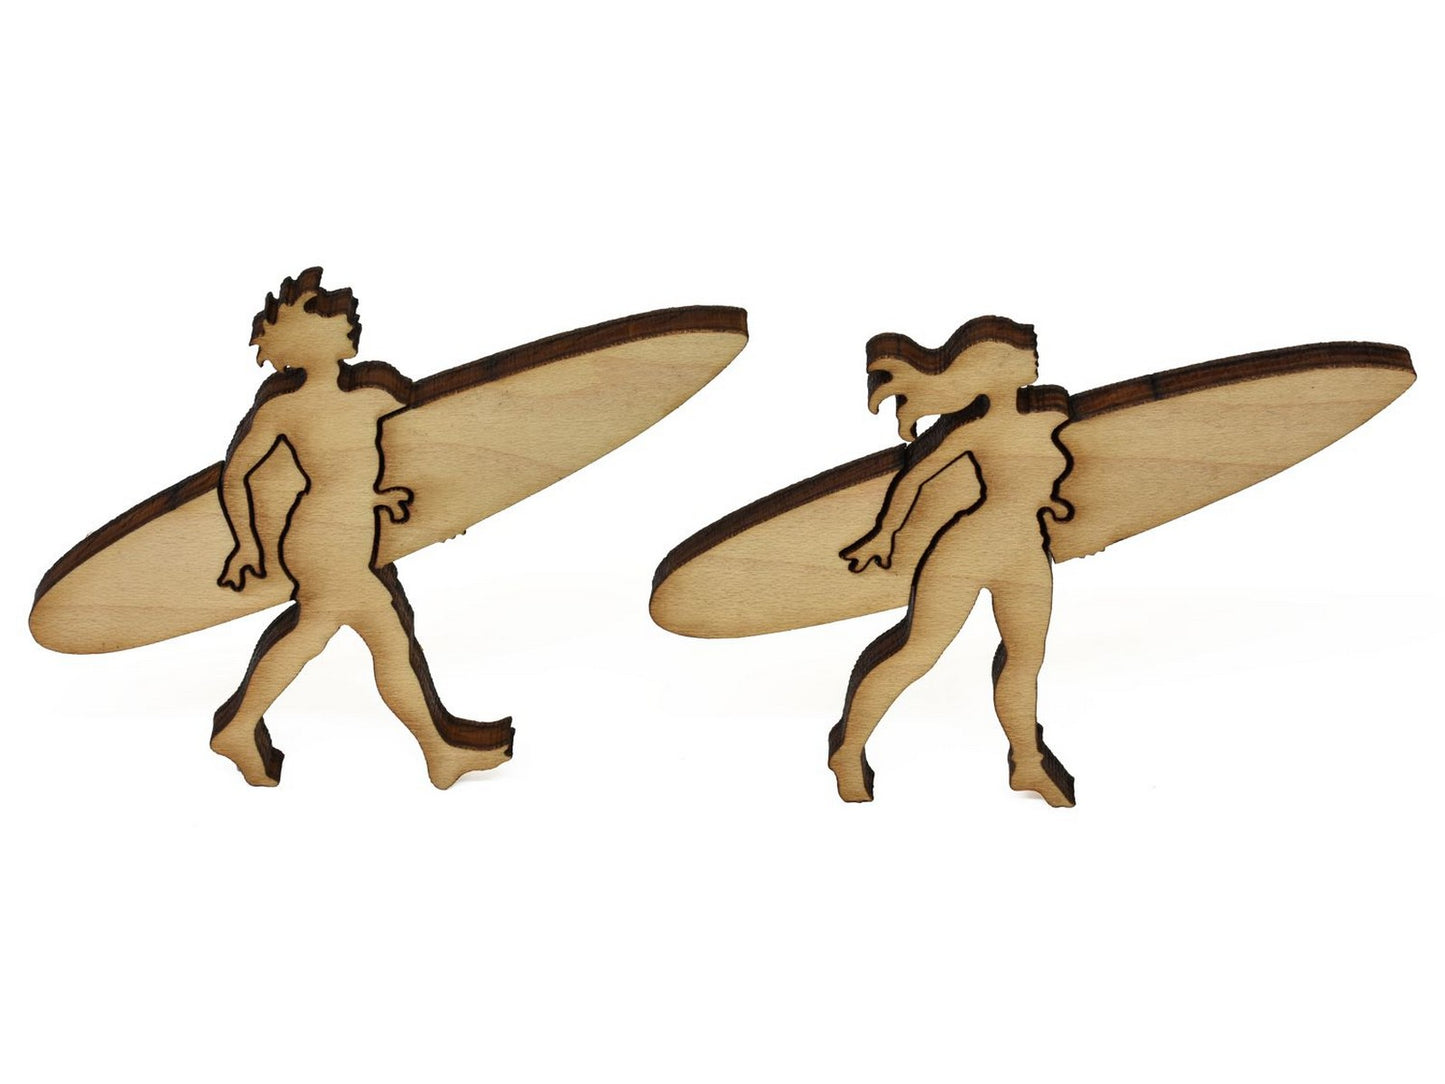 A closeup of pieces showing two surfers with their surfboards.